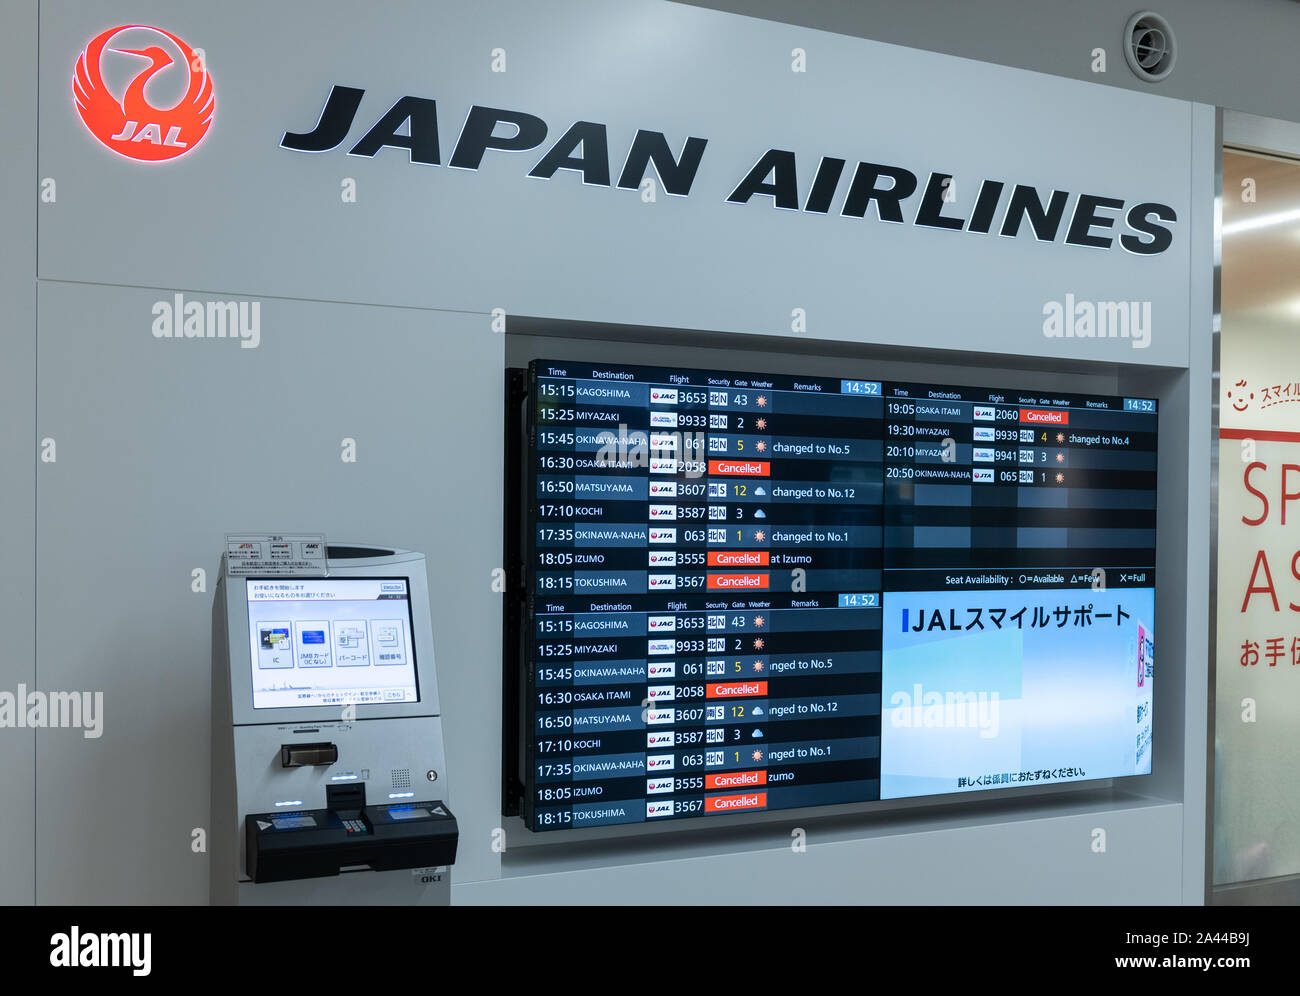 Fukuoka, Japan. 12th Oct, 2019. With possibly the worst typhoon of 2019 bearing down on Tokyo and main surrounding cities, flights have ceased well in advance. The JAL flight departure board at Fukuoka Domestic Airport show multiple cancellations. Alamy Live news/Jayne Russell Stock Photo